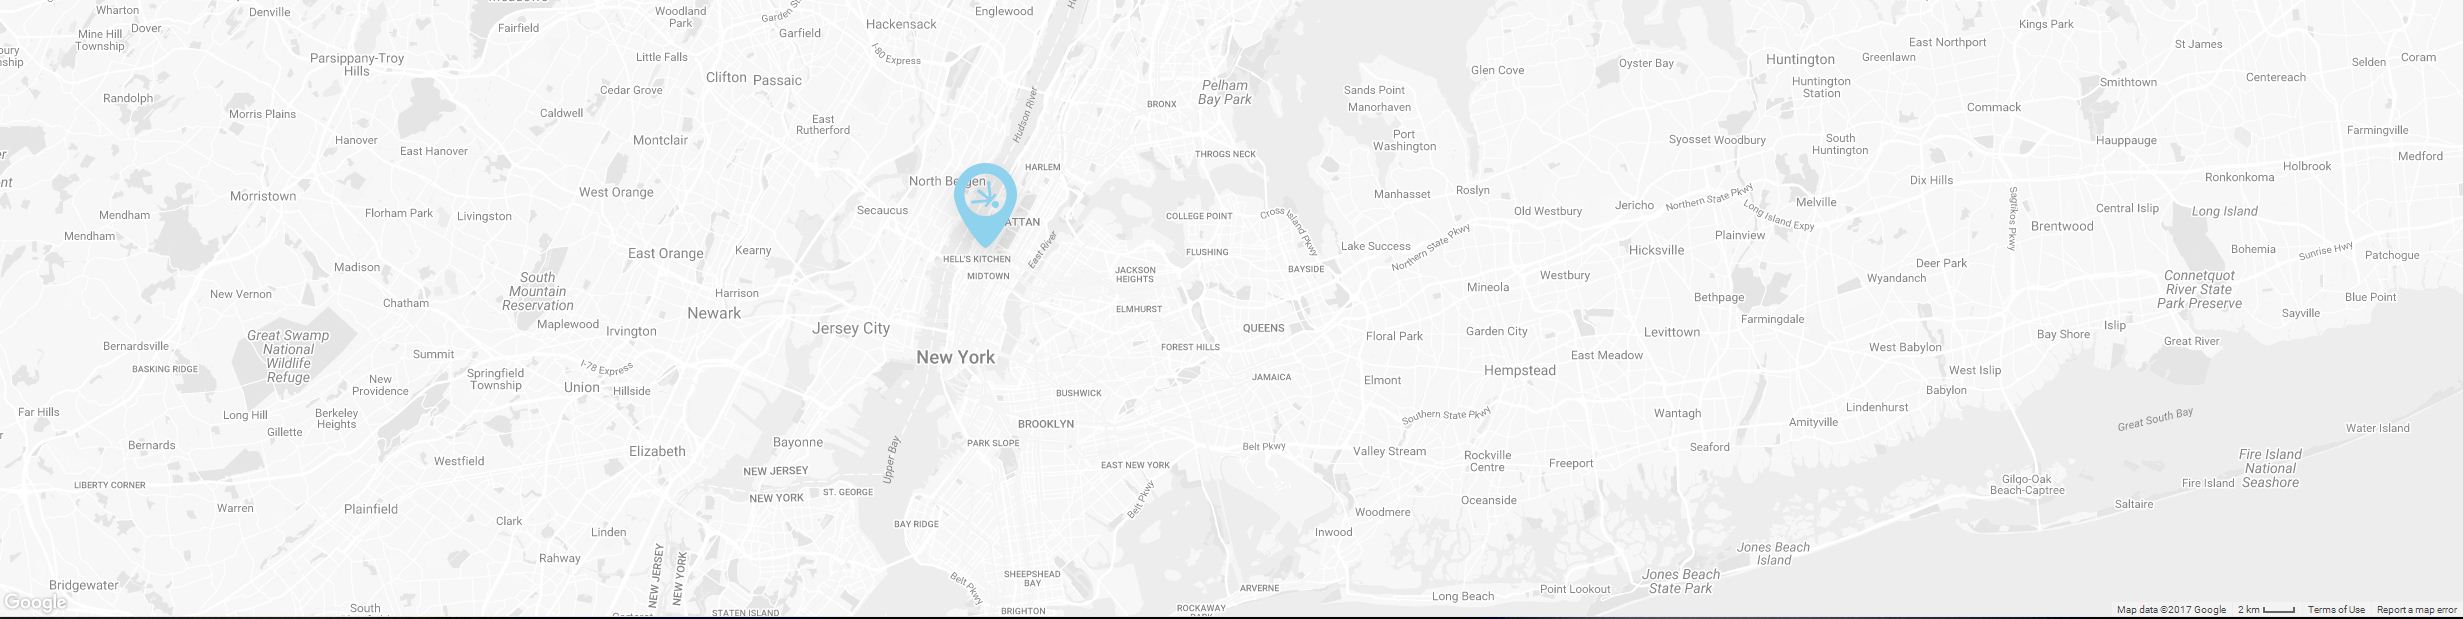 New York map showing office location